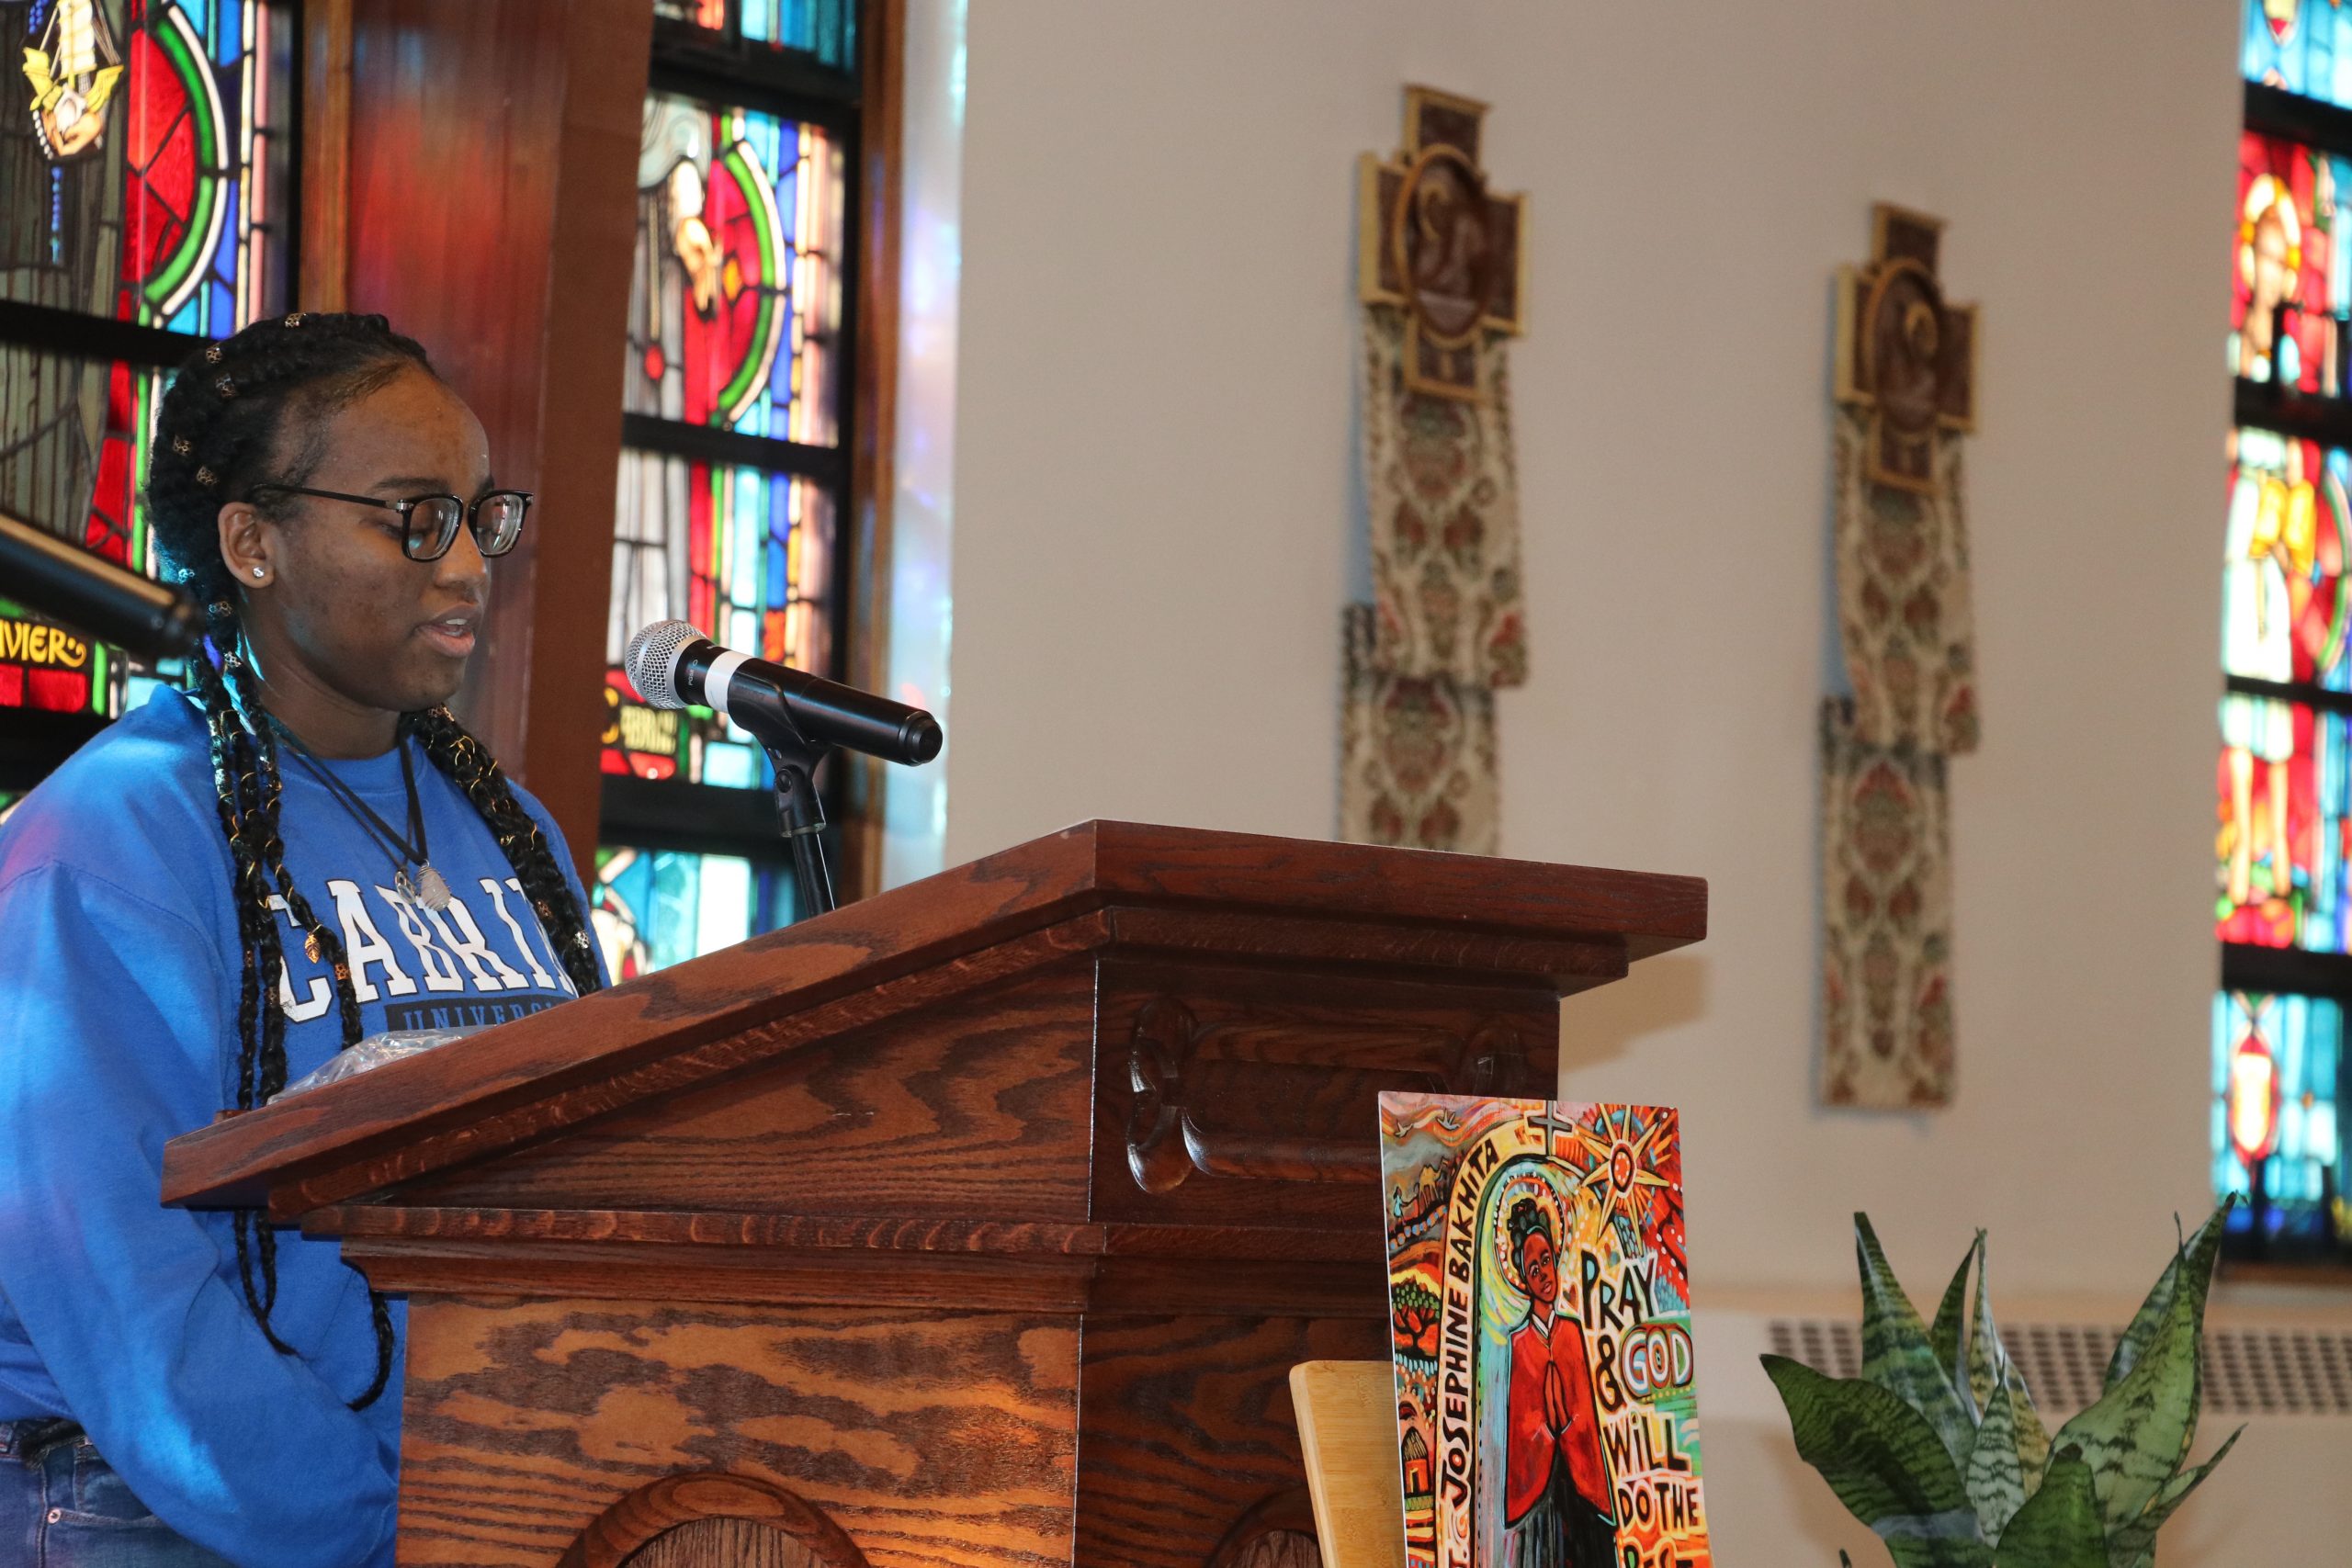 Cabrini celebrates its historical connection to the Underground Railroad